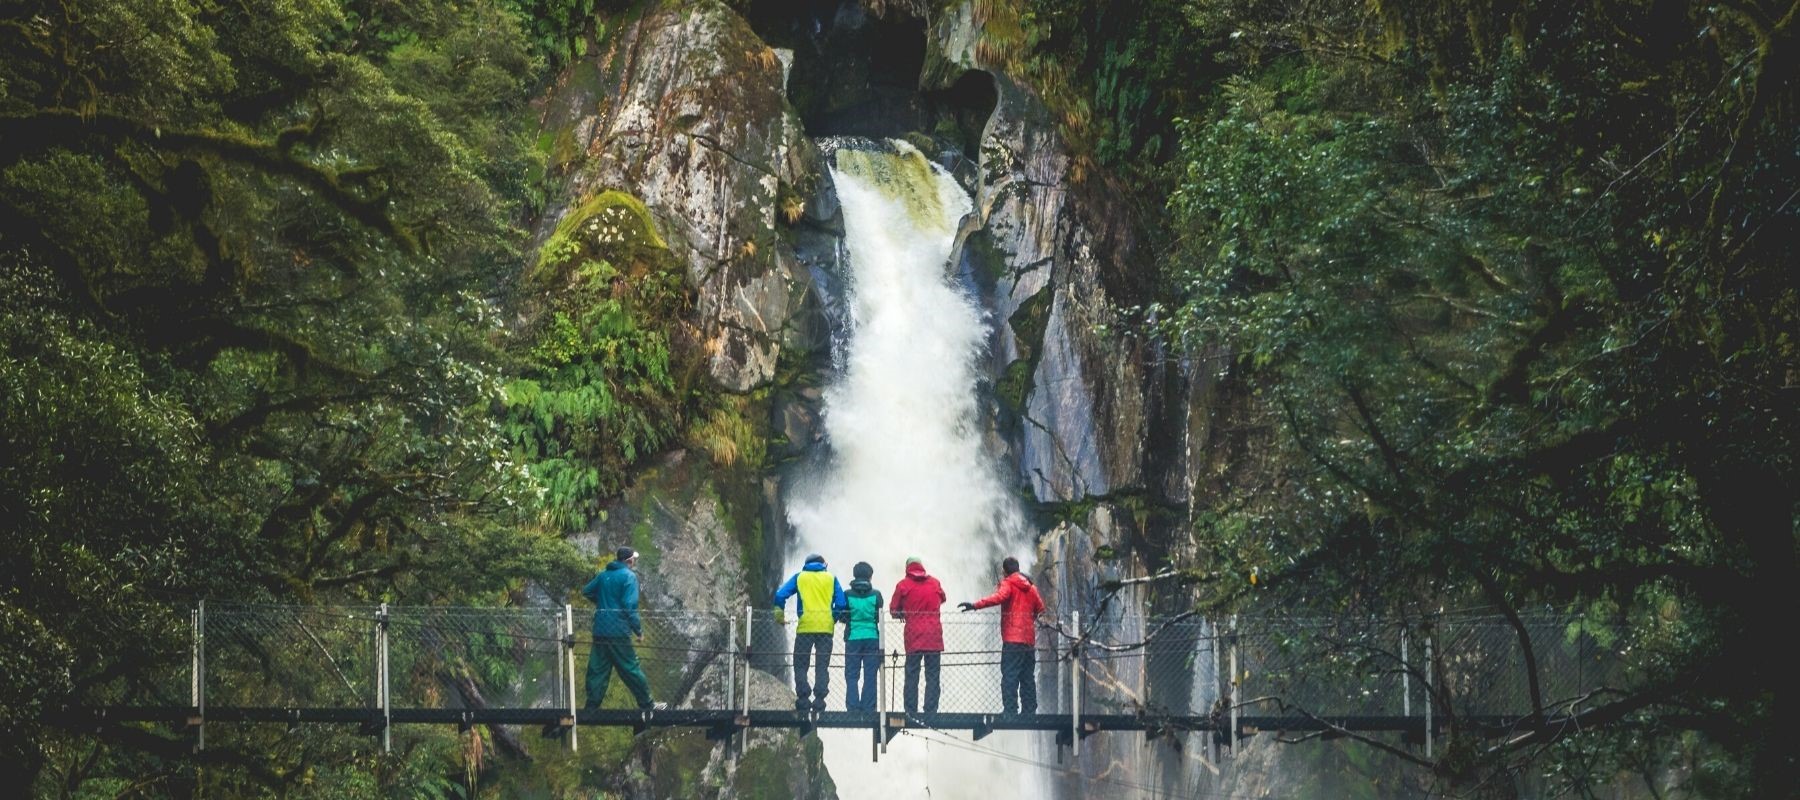 Swing bridge on the Milford Track with hikers. Guests from Milford Sound Lodge.